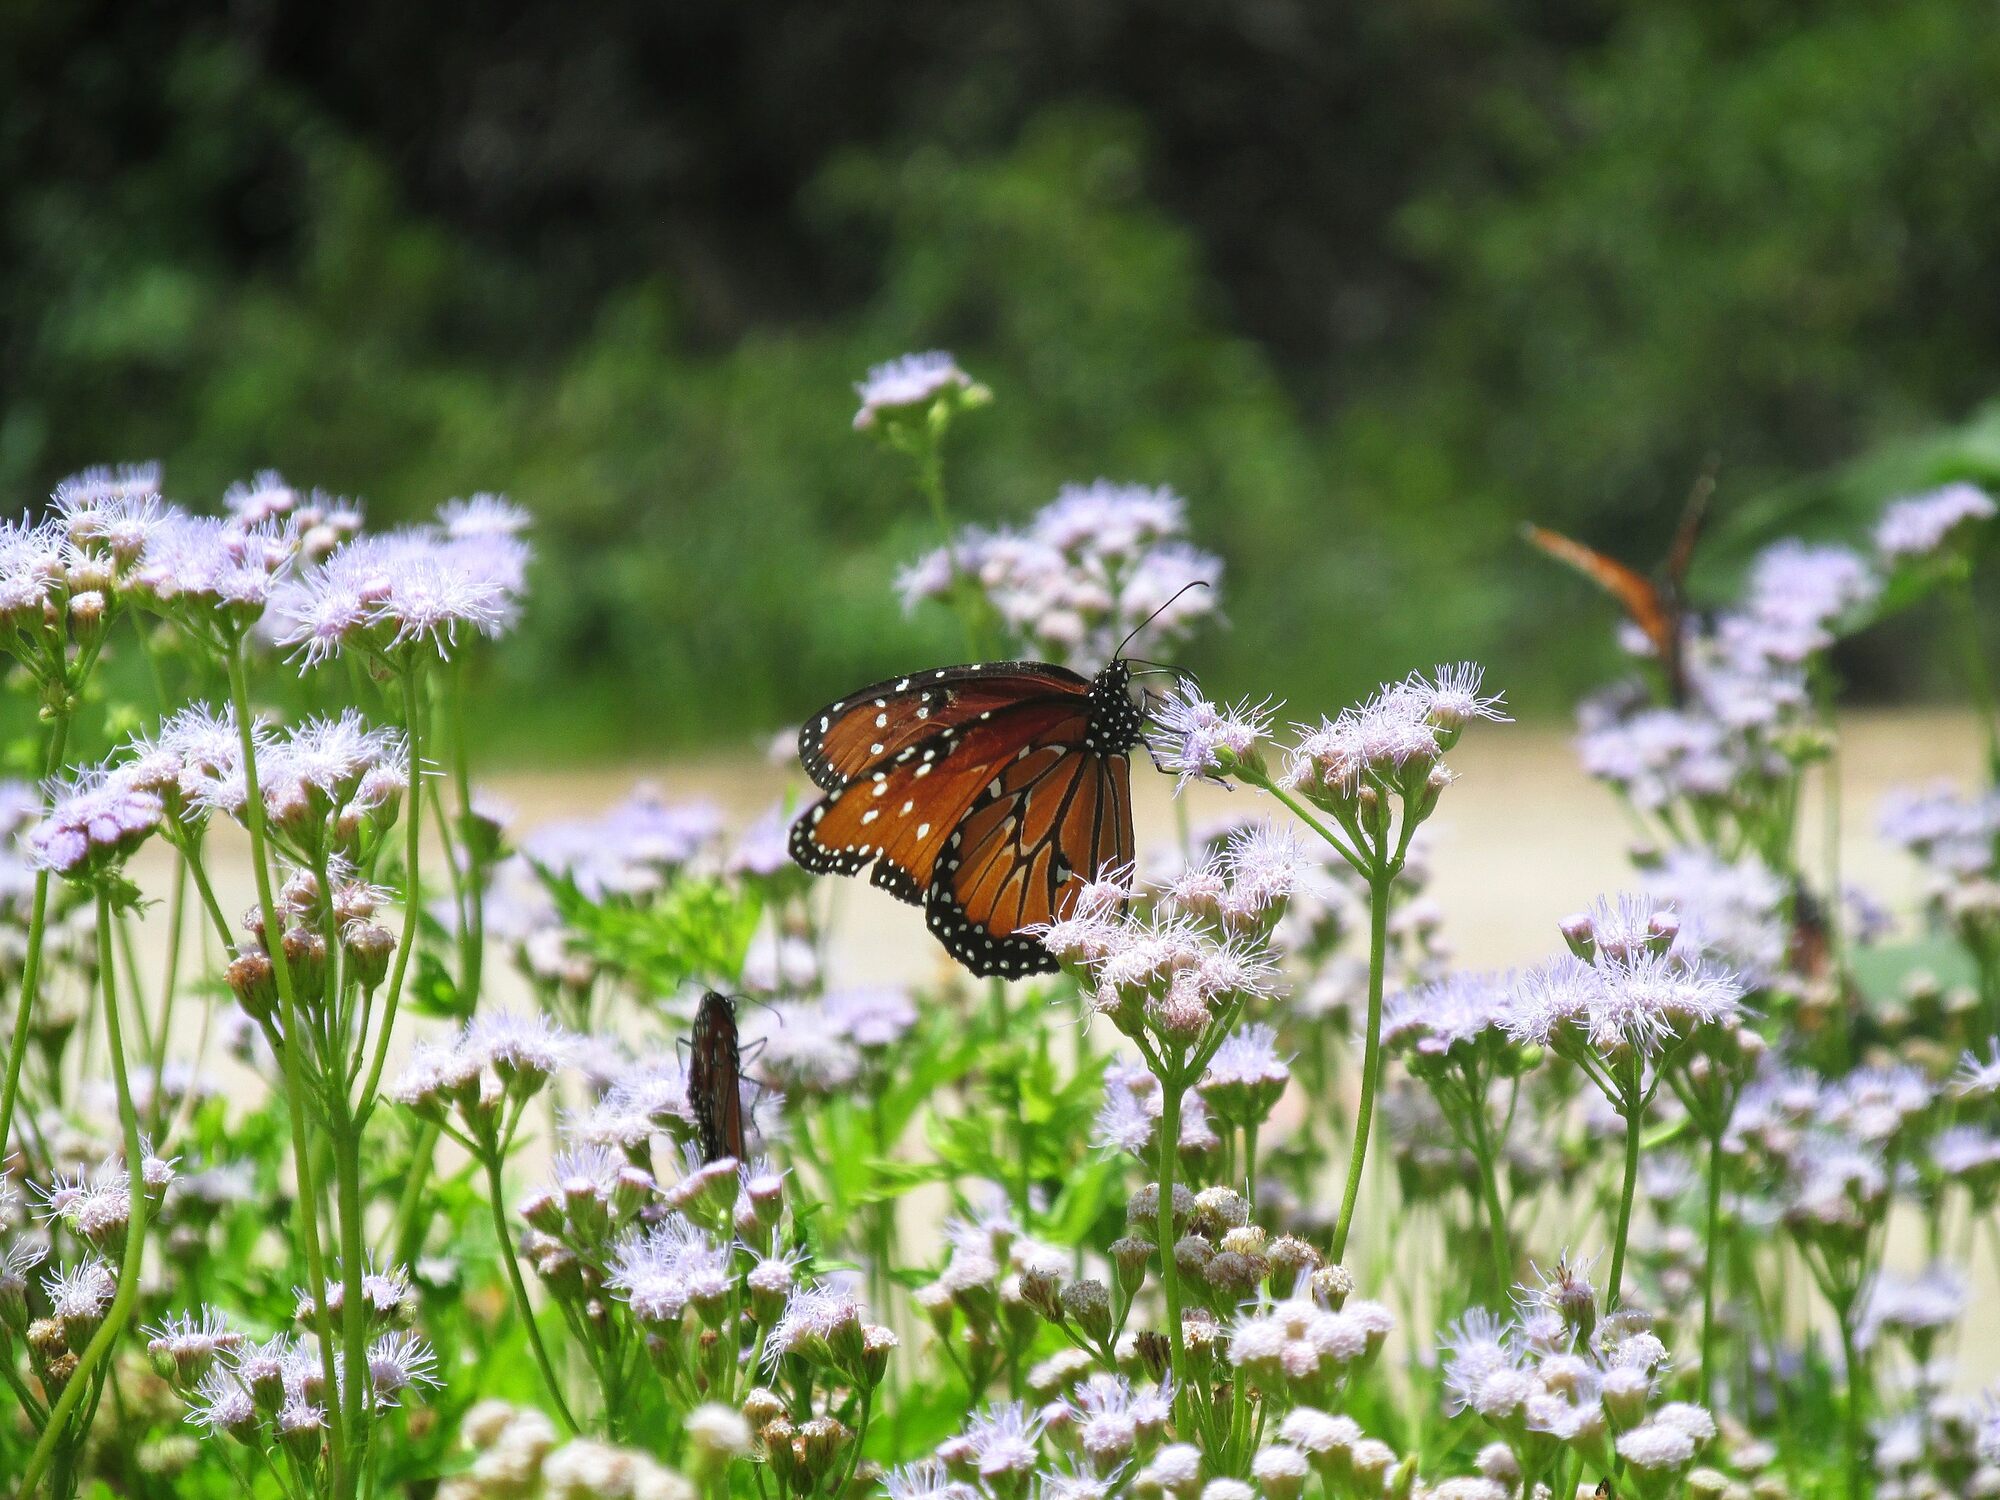 Photograph of a monarch butterfly and a grasshopper on pinkish flowers.